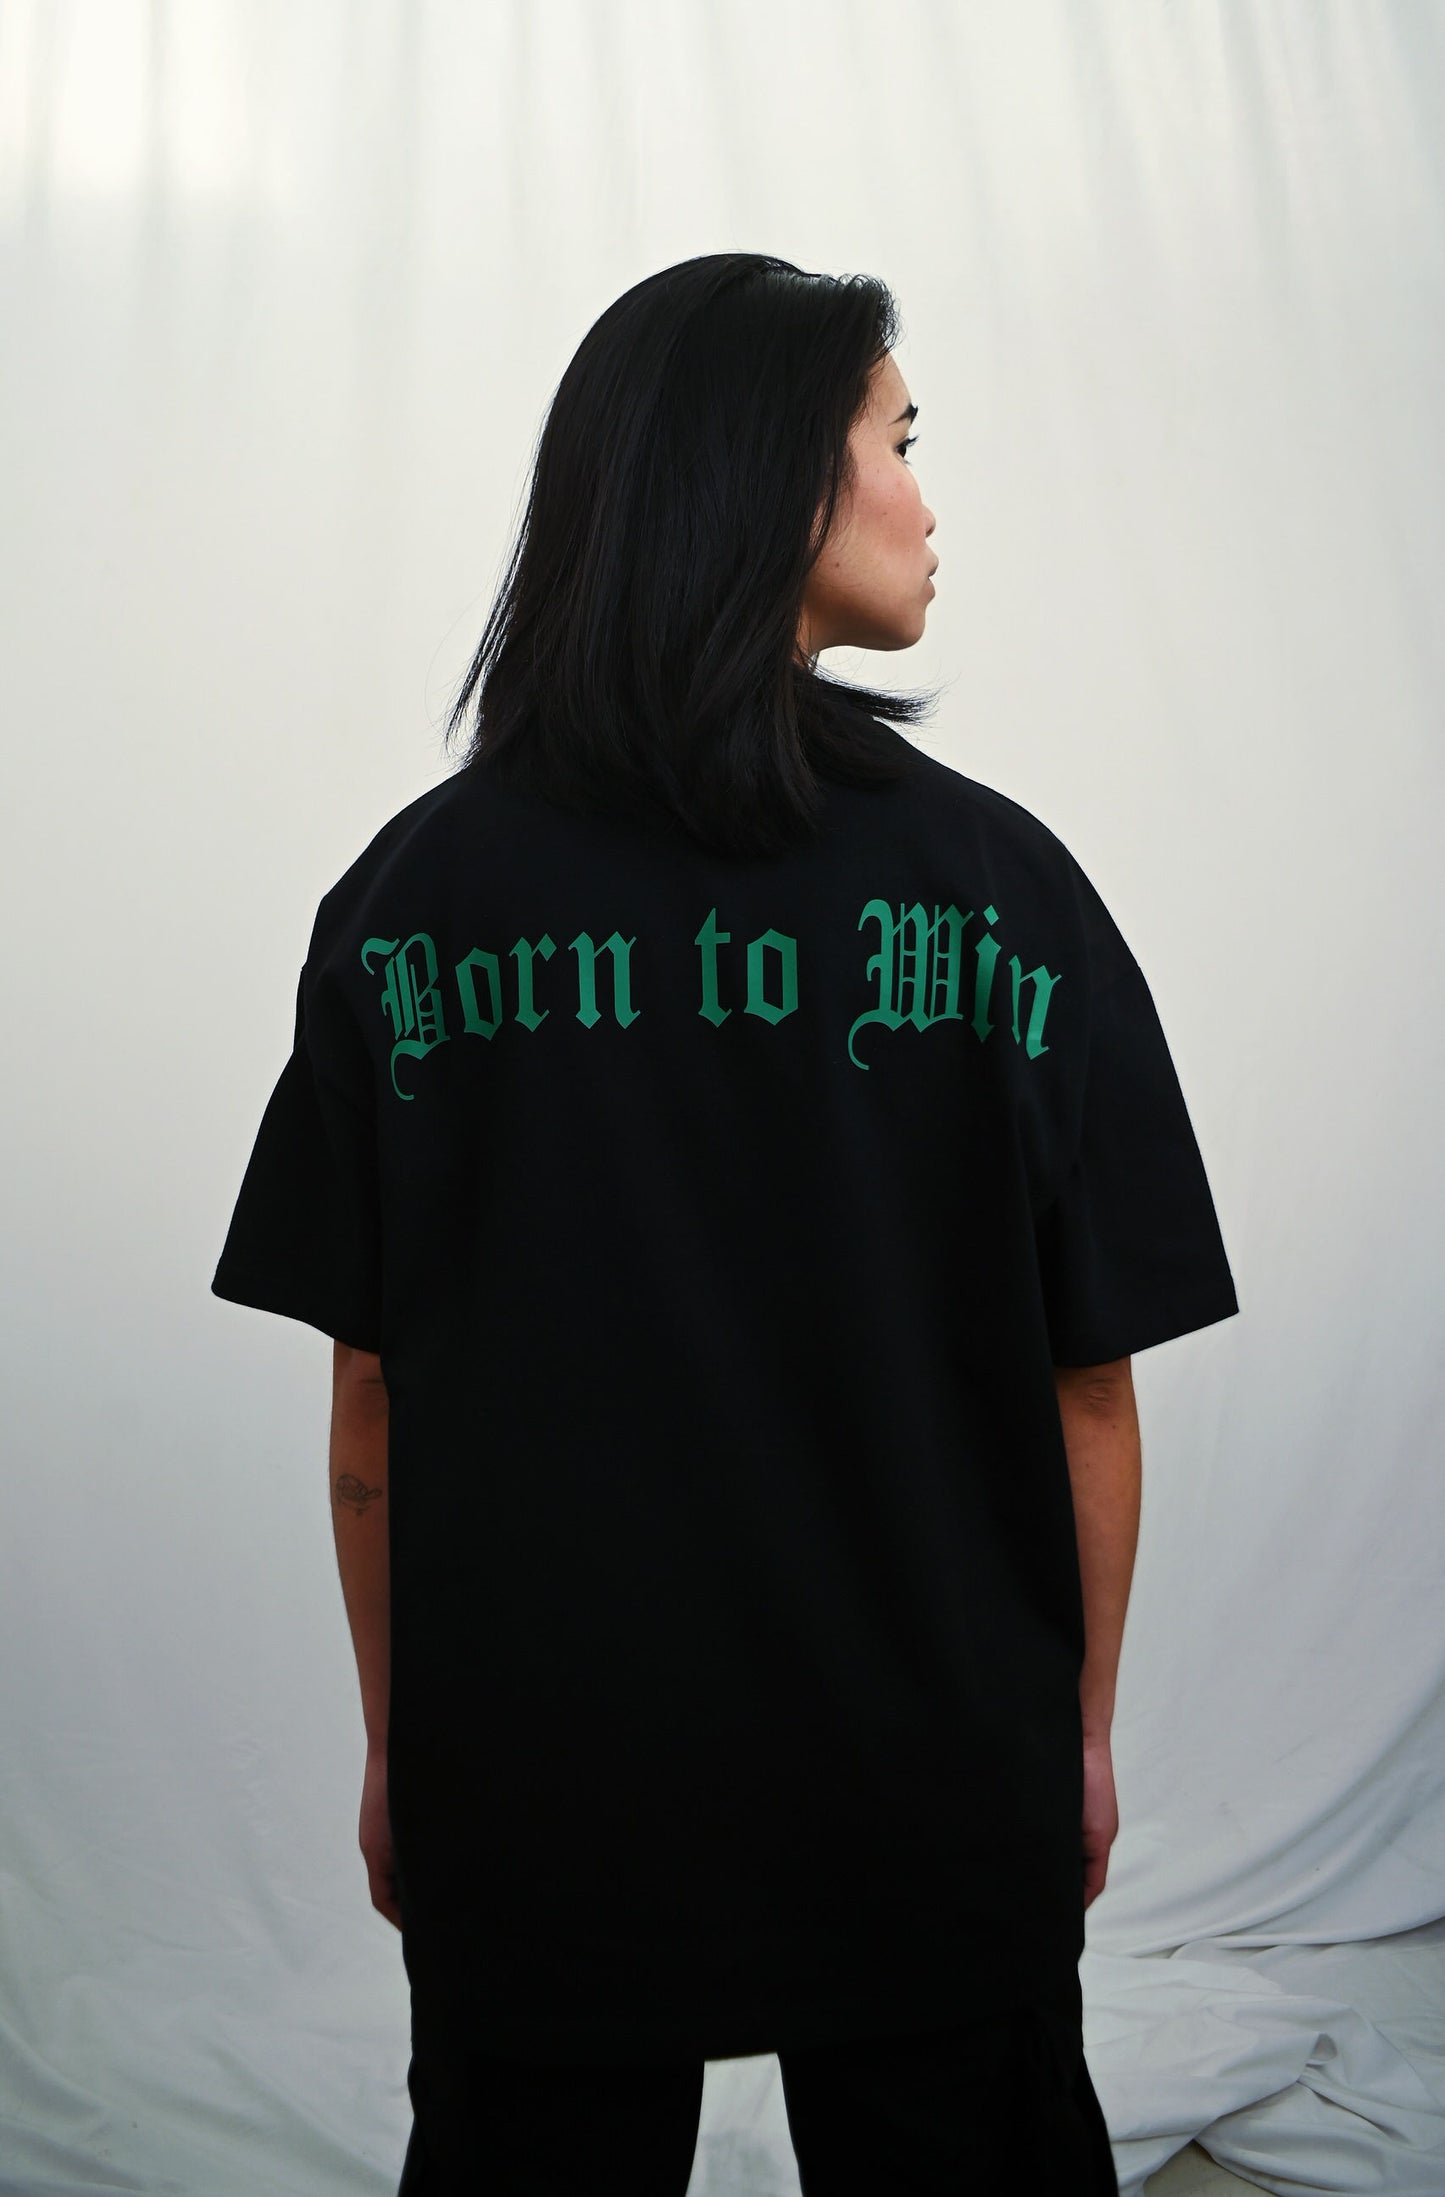 Female model wearing a Black oversize tshirt with green born to win design on the back